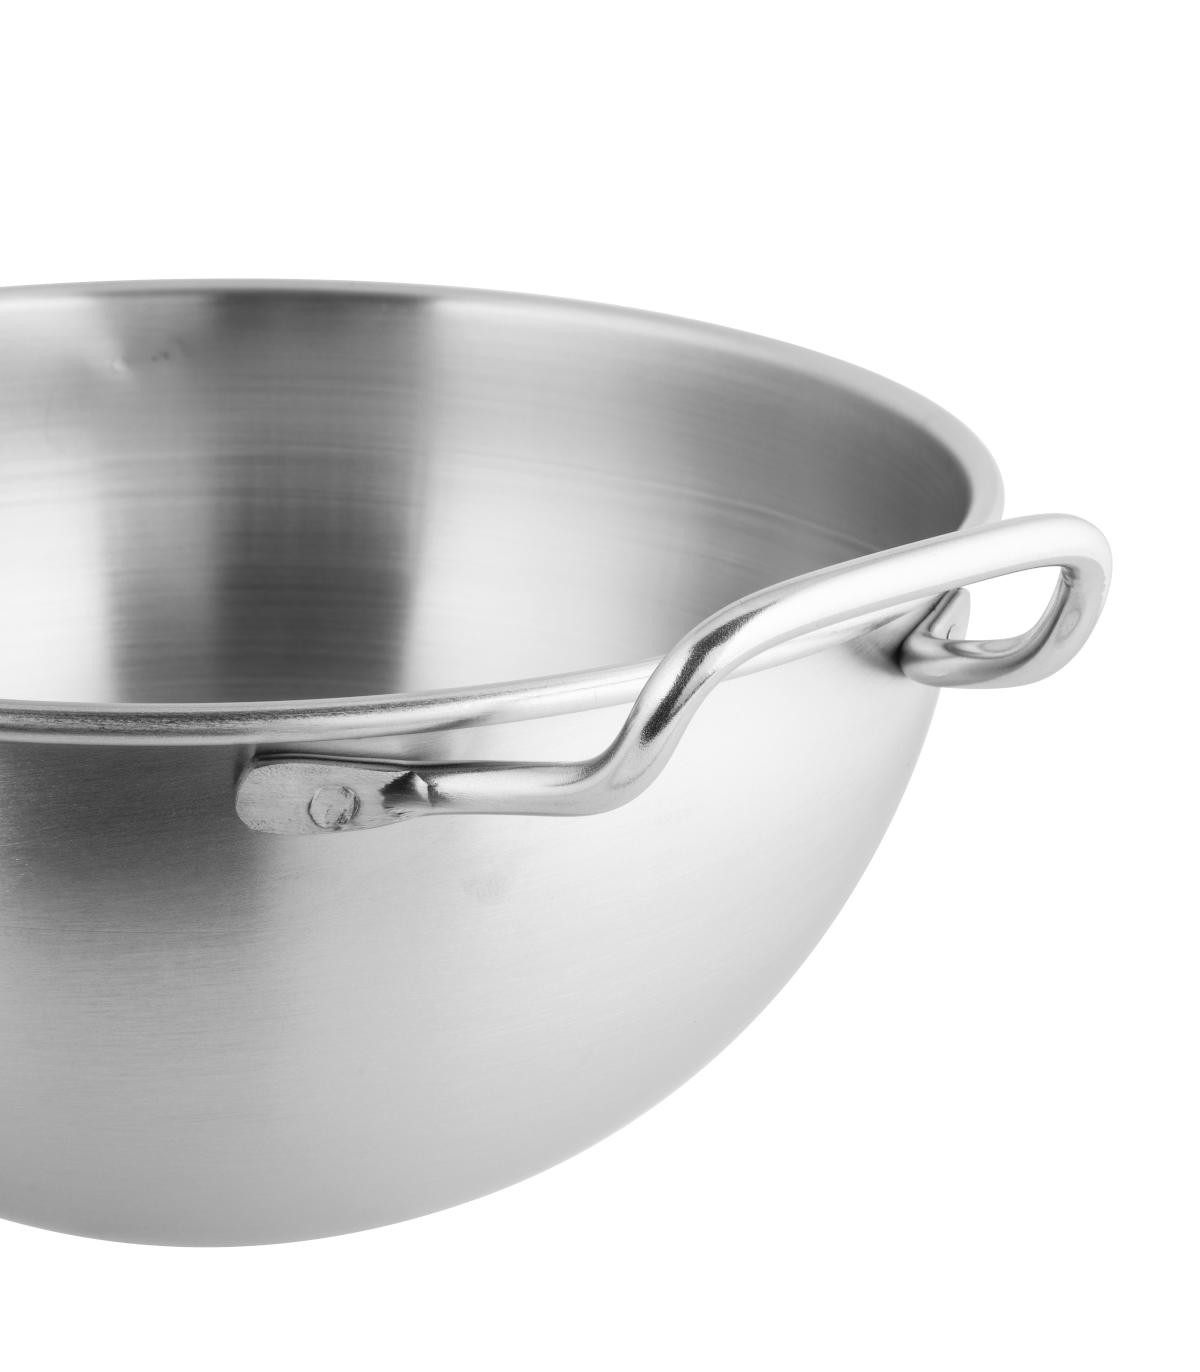 Mixing bowl with handles Ø 36 cm stainless steel